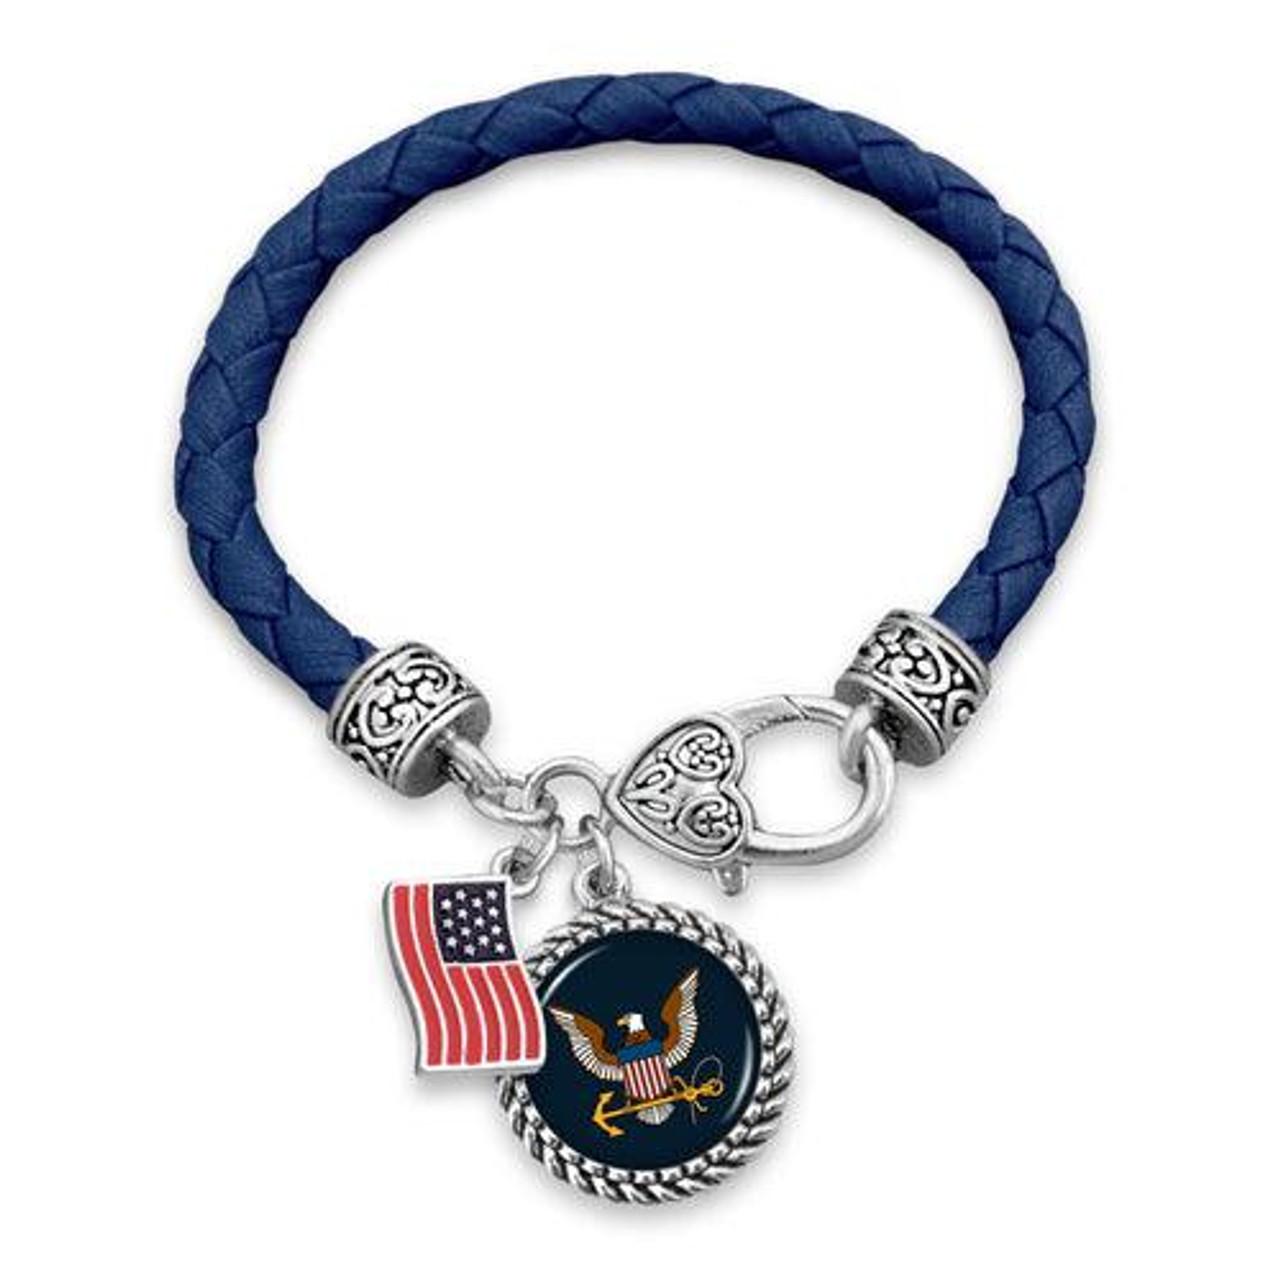 U.S. Navy® Leather Bracelet with Flag Accent - Navy